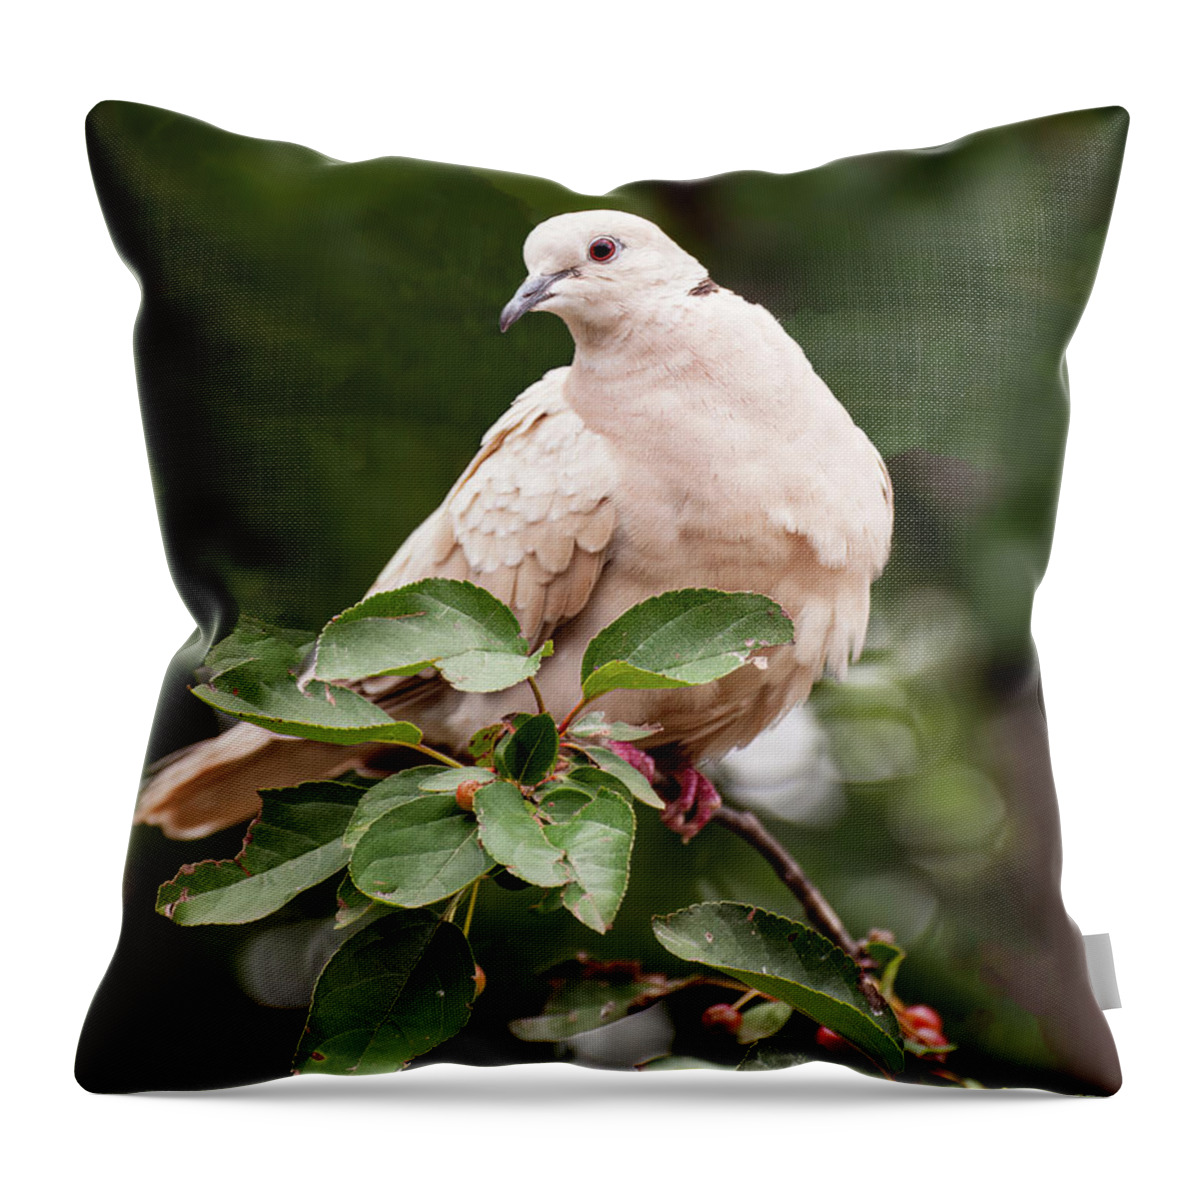 White Dove Throw Pillow featuring the photograph White Dove On A Bush by Flees Photos